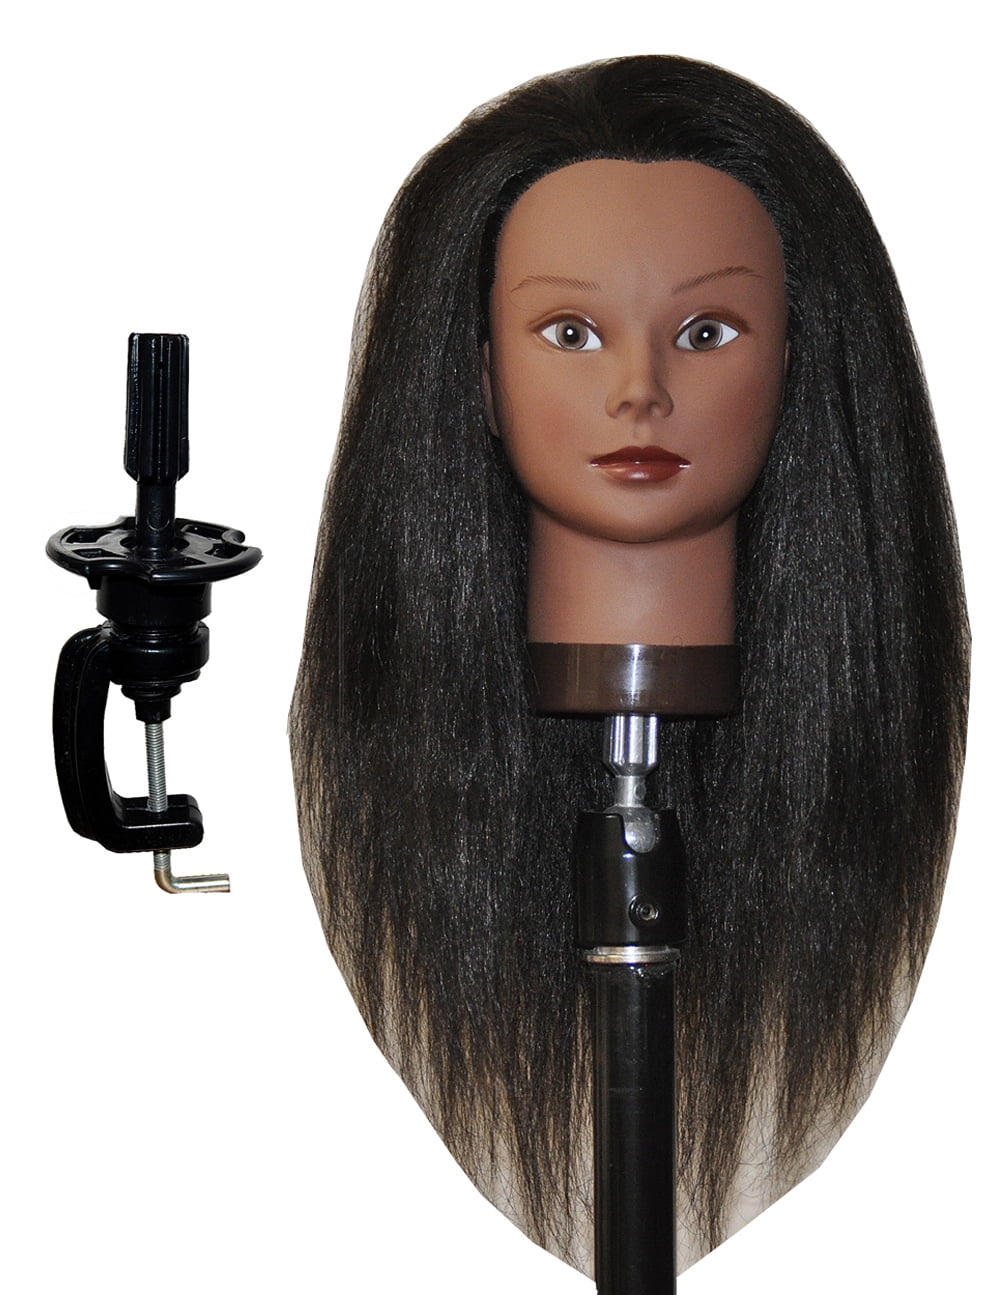 Afro Coarse 100% Real Hair Mannequin Head Hairdresser Training